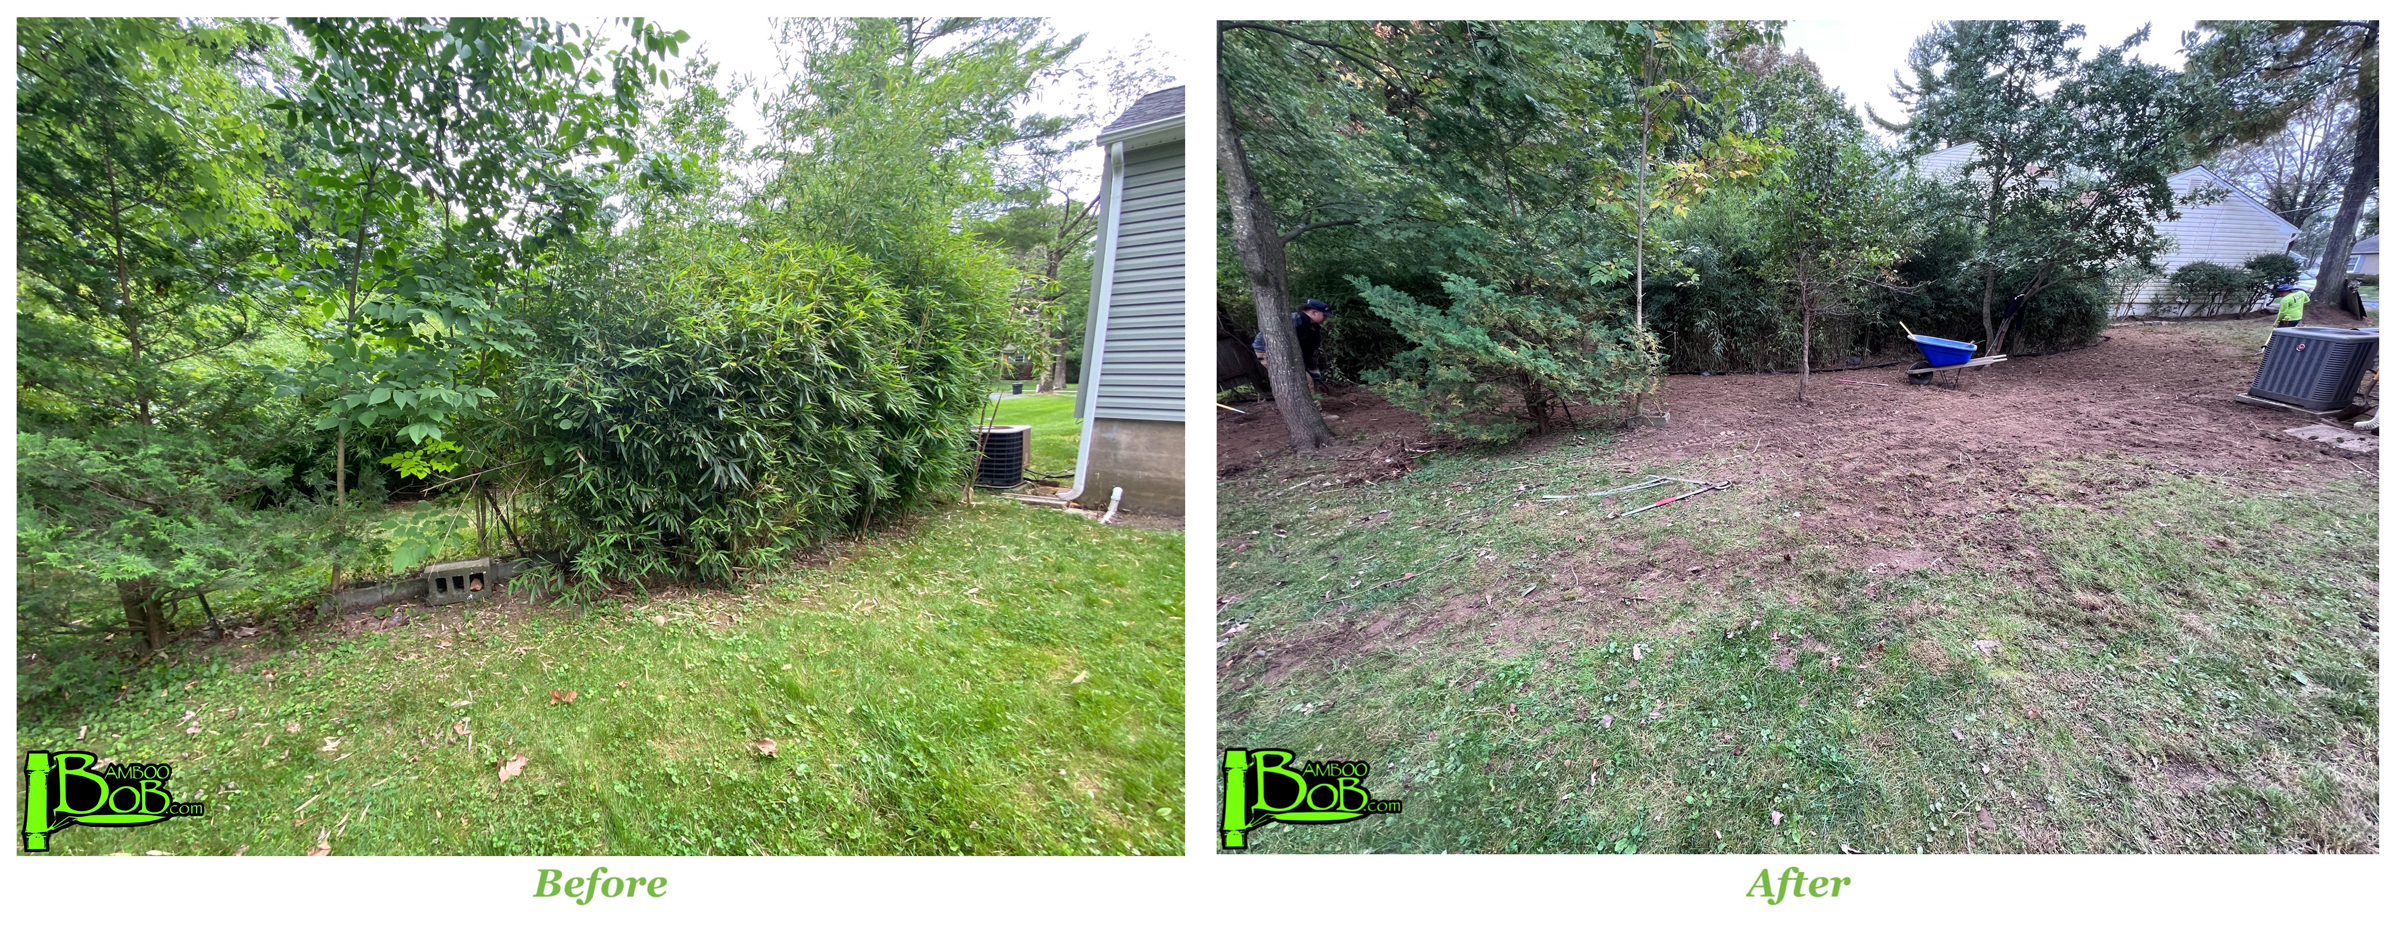 Parsippany, NJ - Before + After